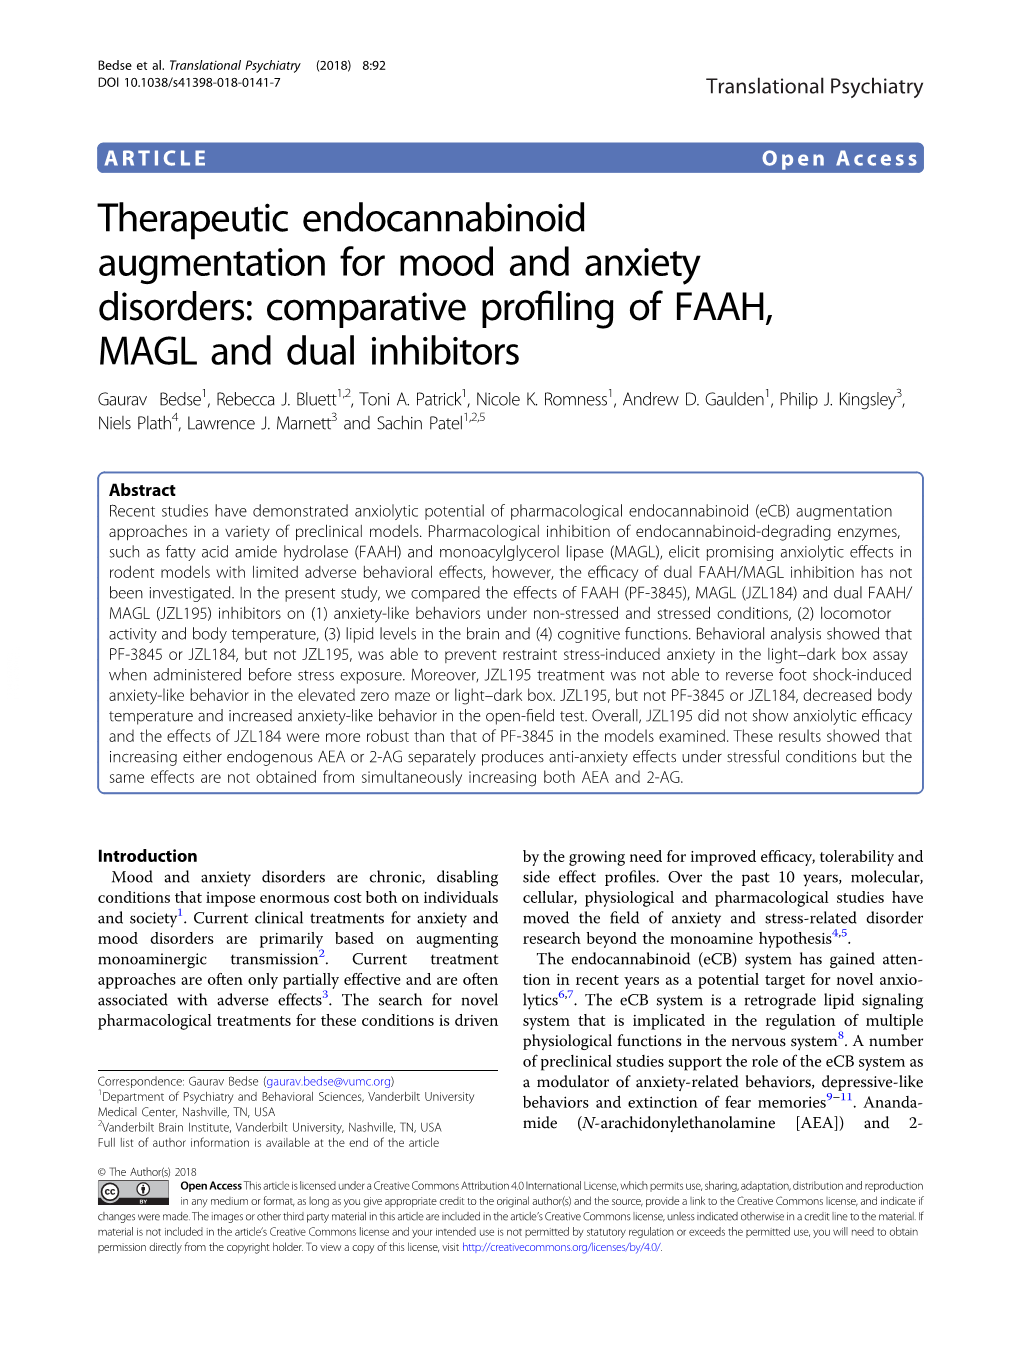 Comparative Profiling of FAAH, MAGL and Dual Inhibitors